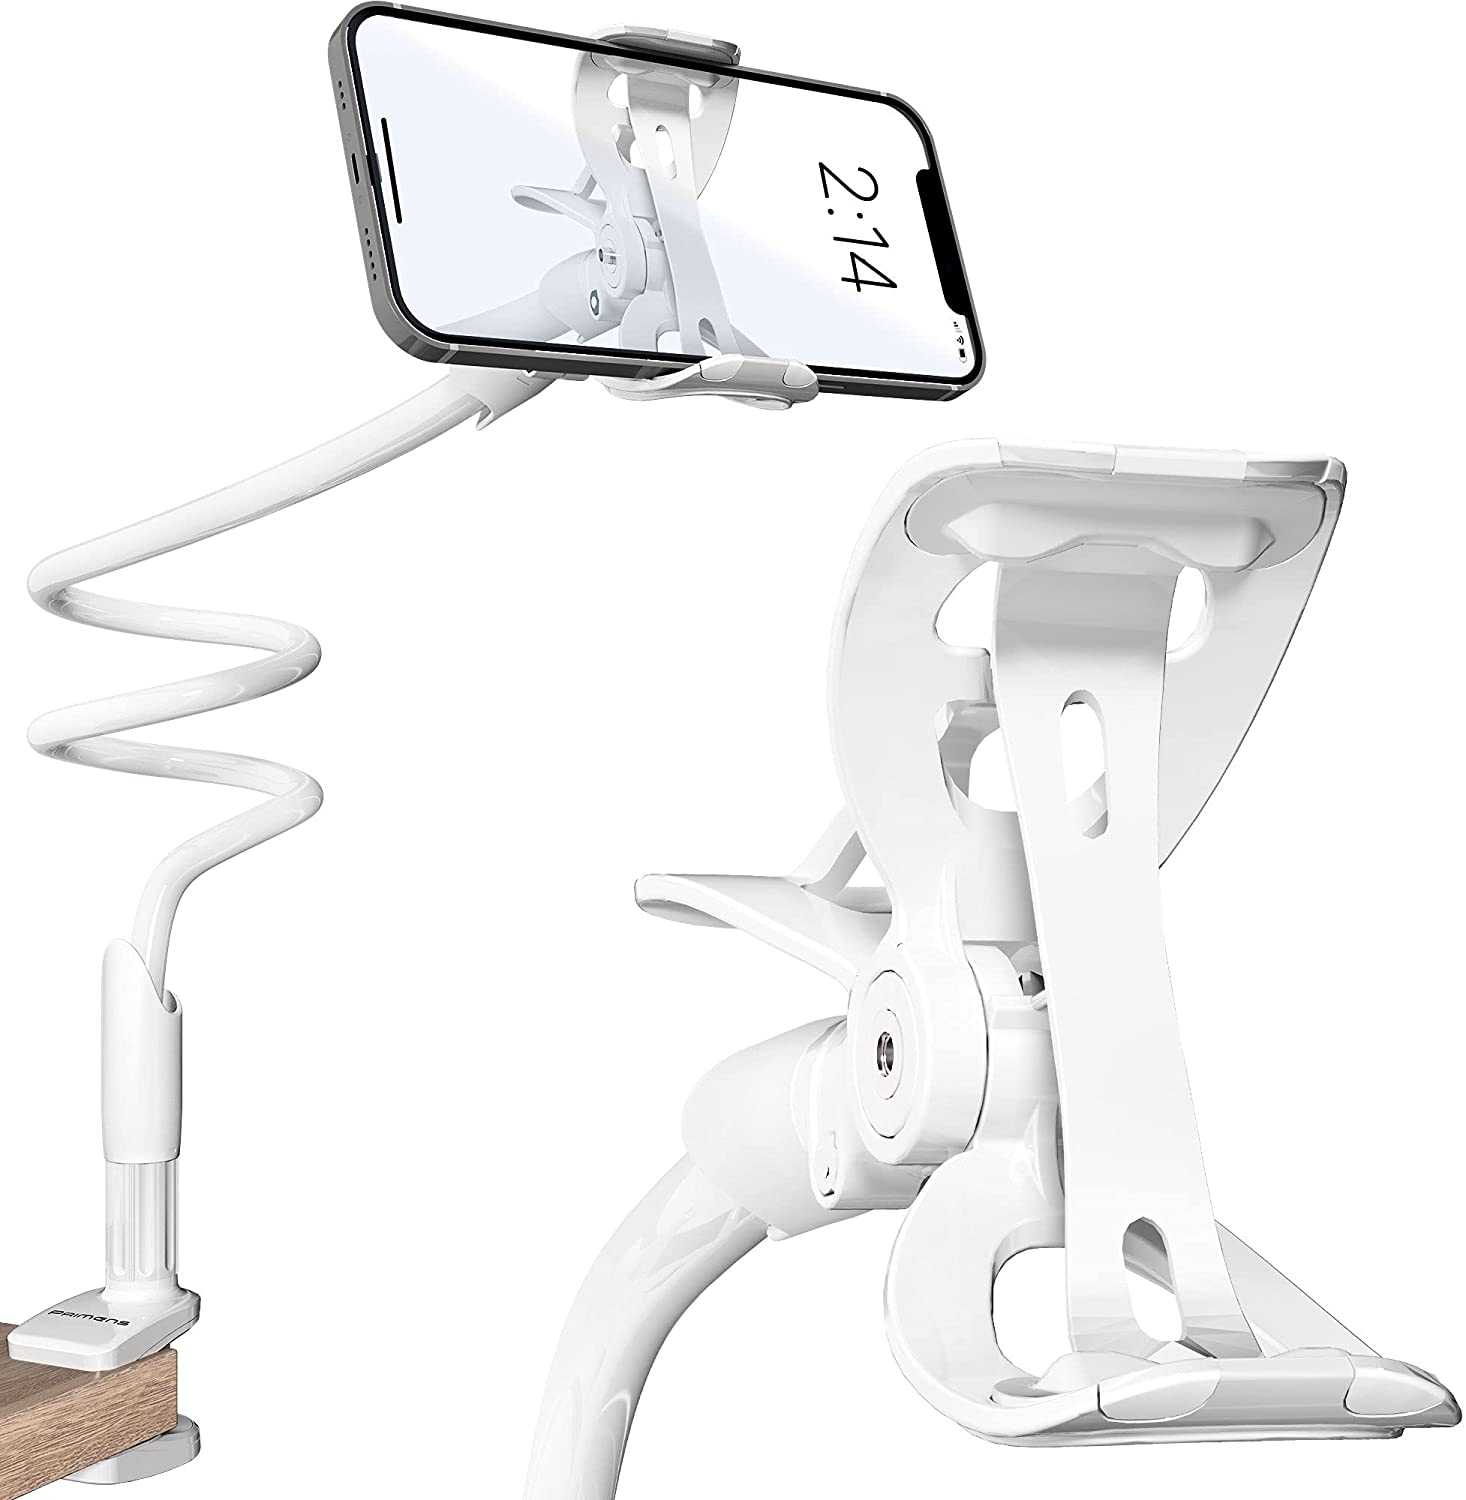 LONG ARM MOUNT LAZY Universal Holder Stand For Mobile Cell Phone